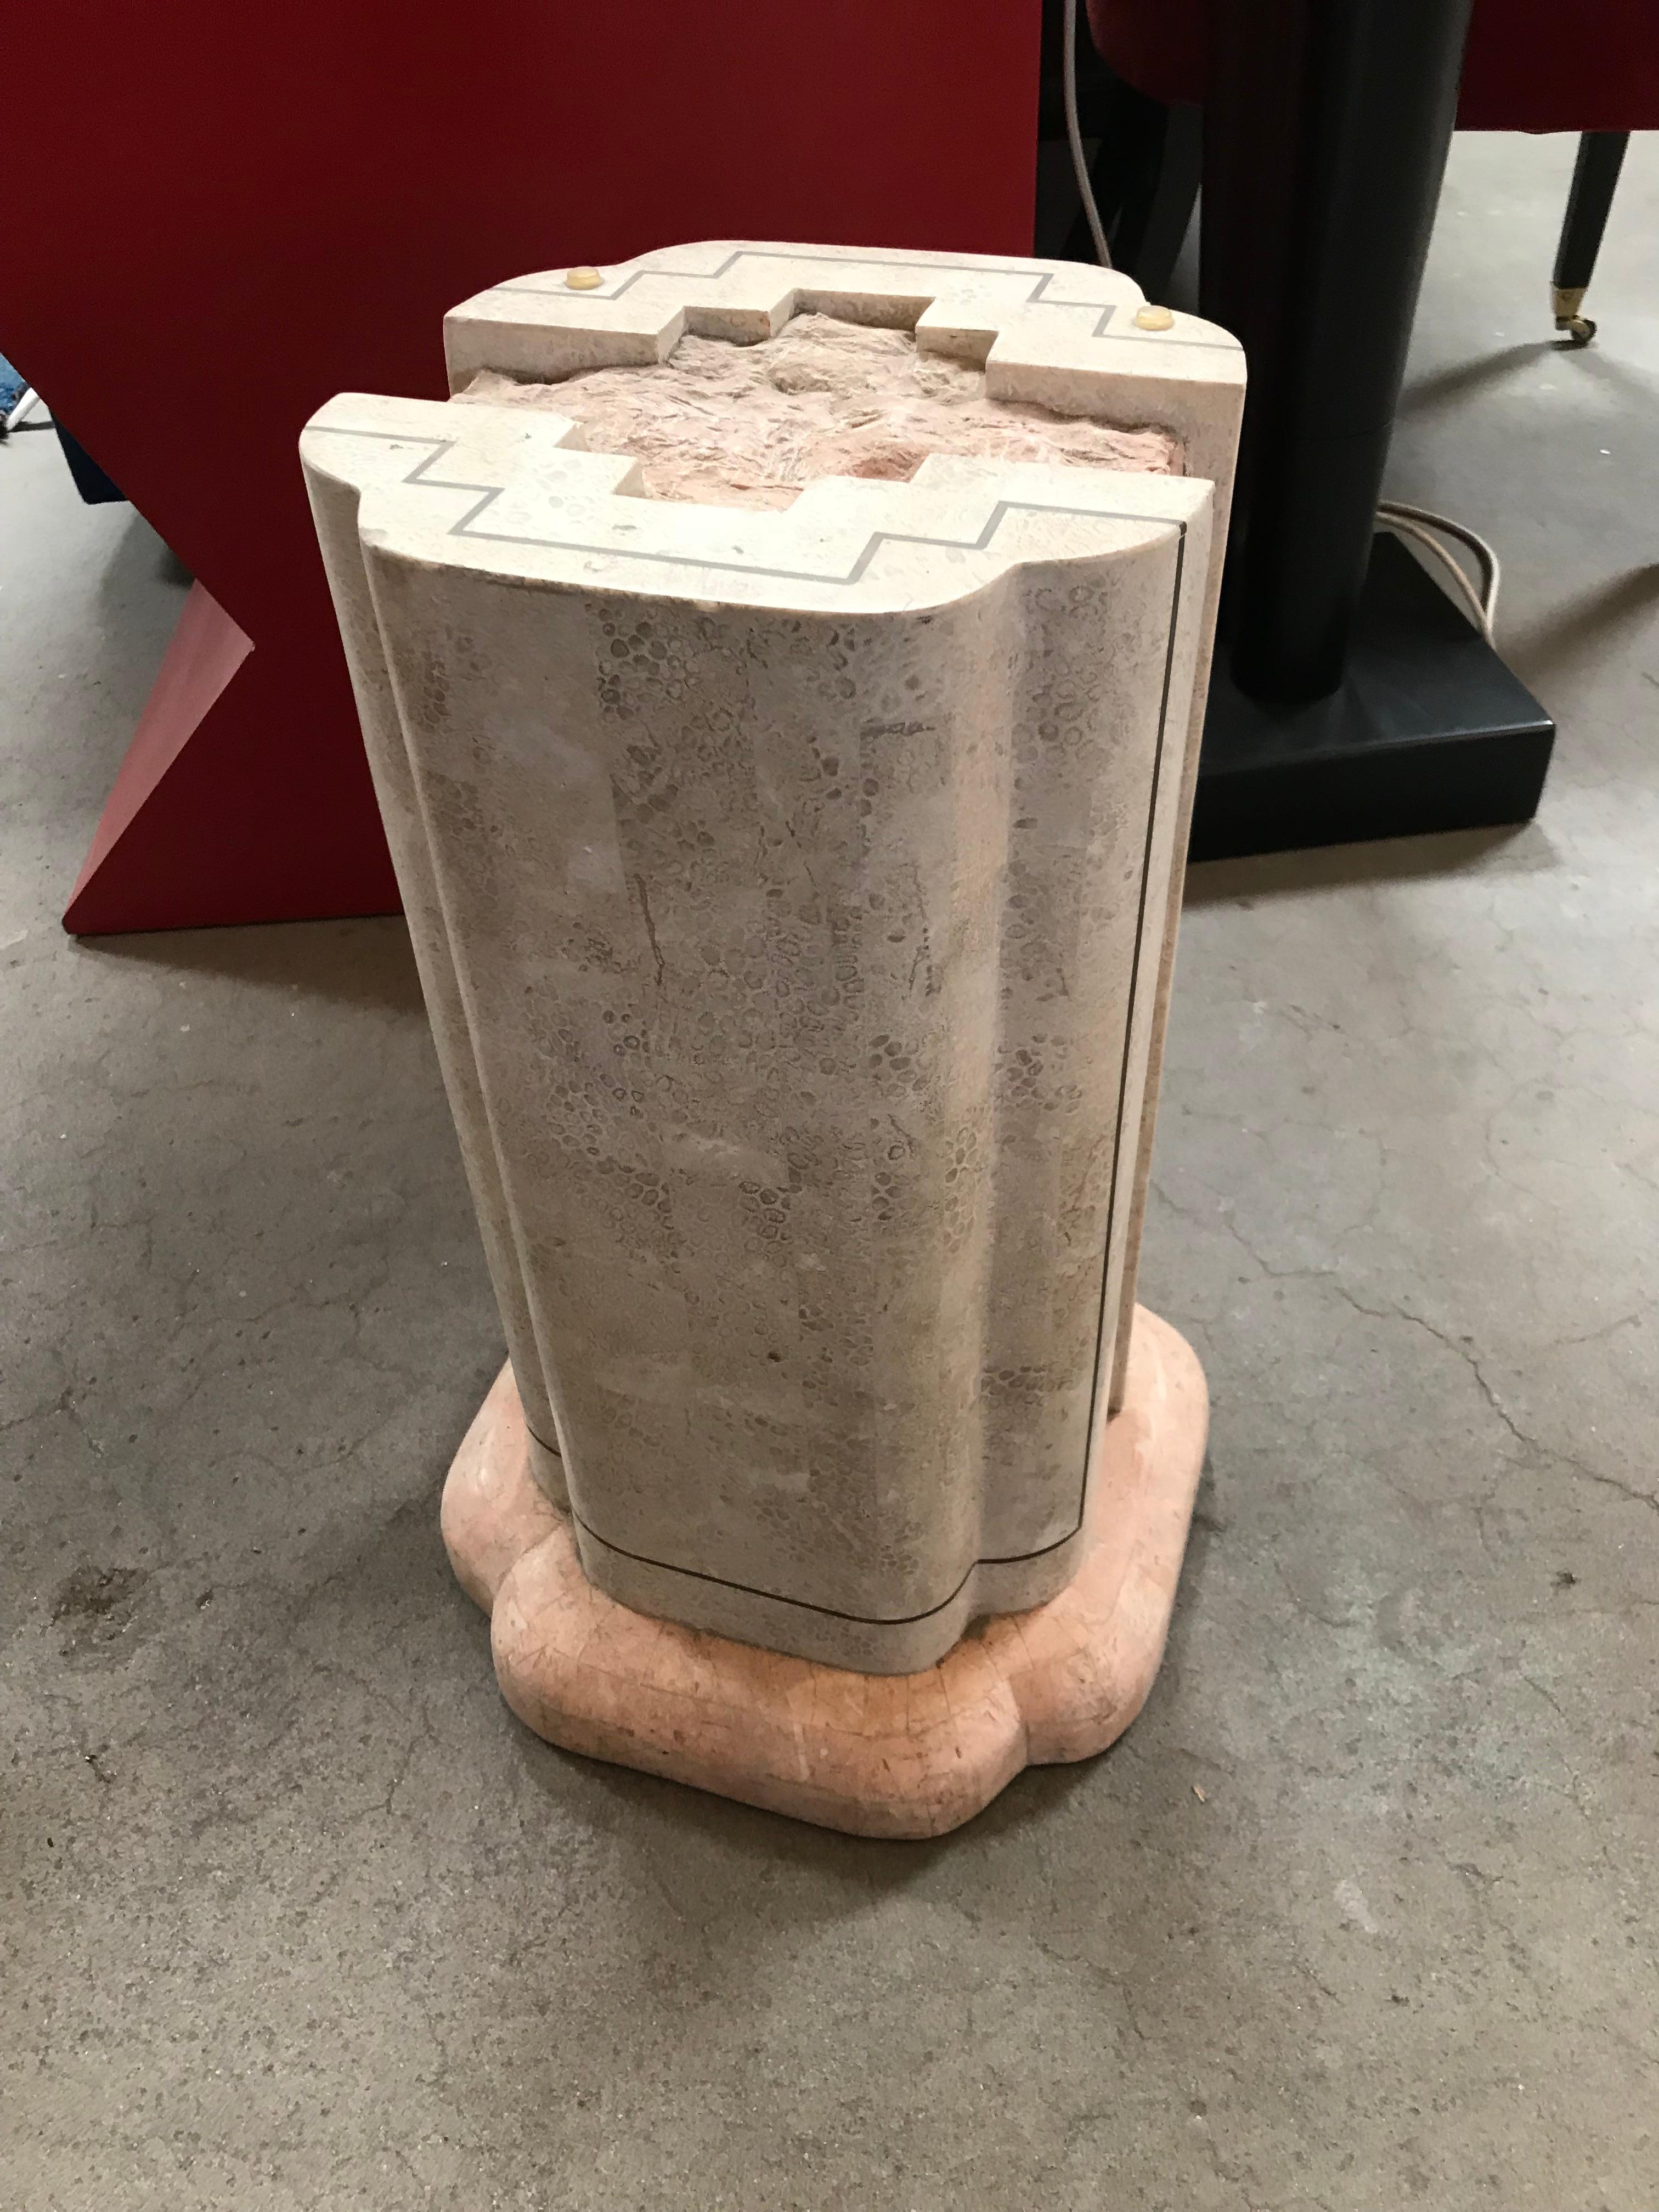 Tesselated marble pedestal by Maitland-Smith. Beautiful combination of a patterned neutral colored and a light pink marble. The centre of the piece is filled with rough pink marble pieces.
The glass top seems a little bit too big for the base.

